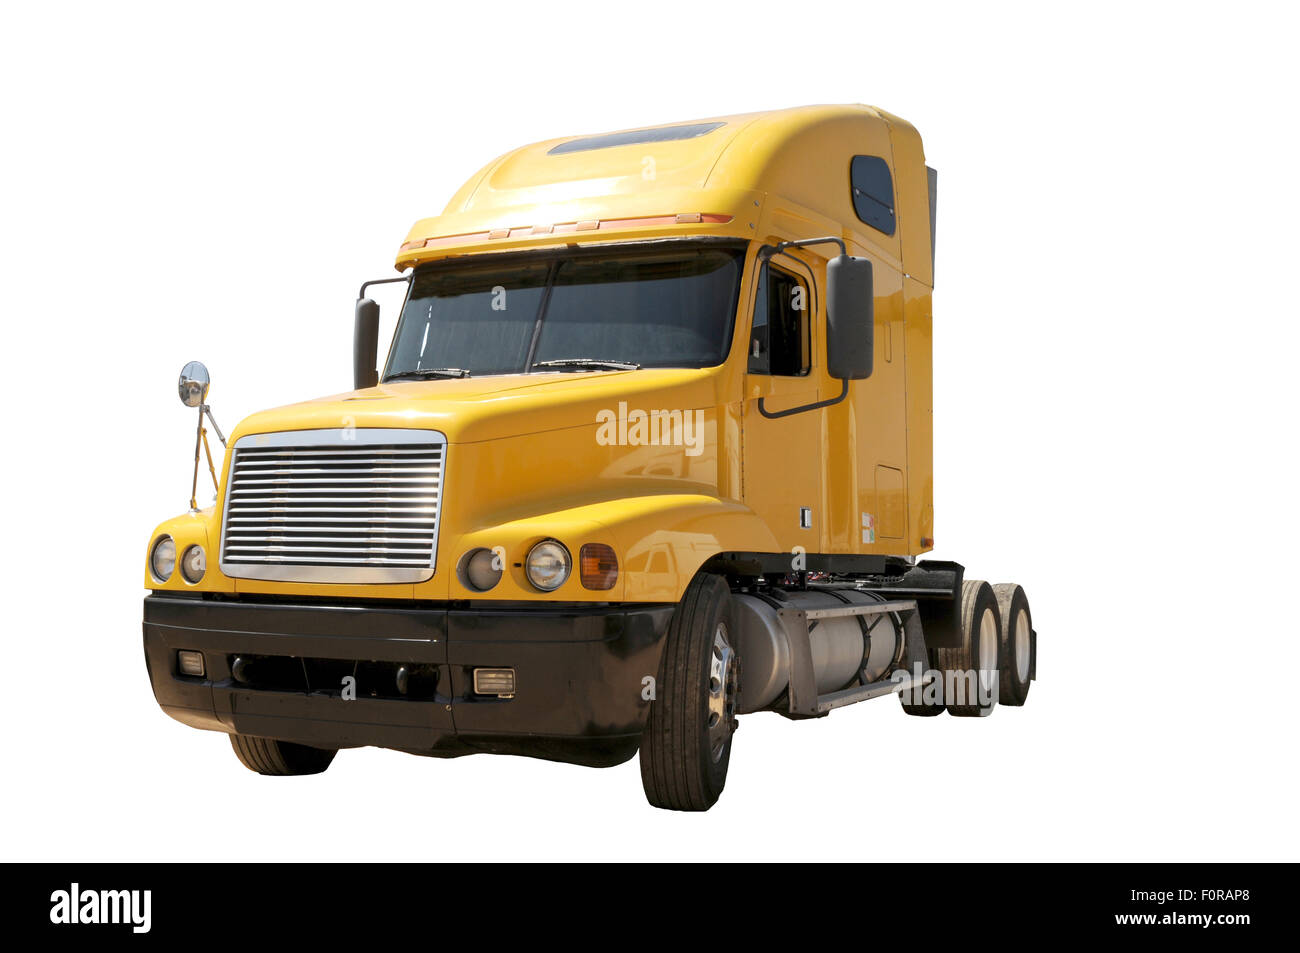 Yello tractor trailer isolated on a white background Stock Photo